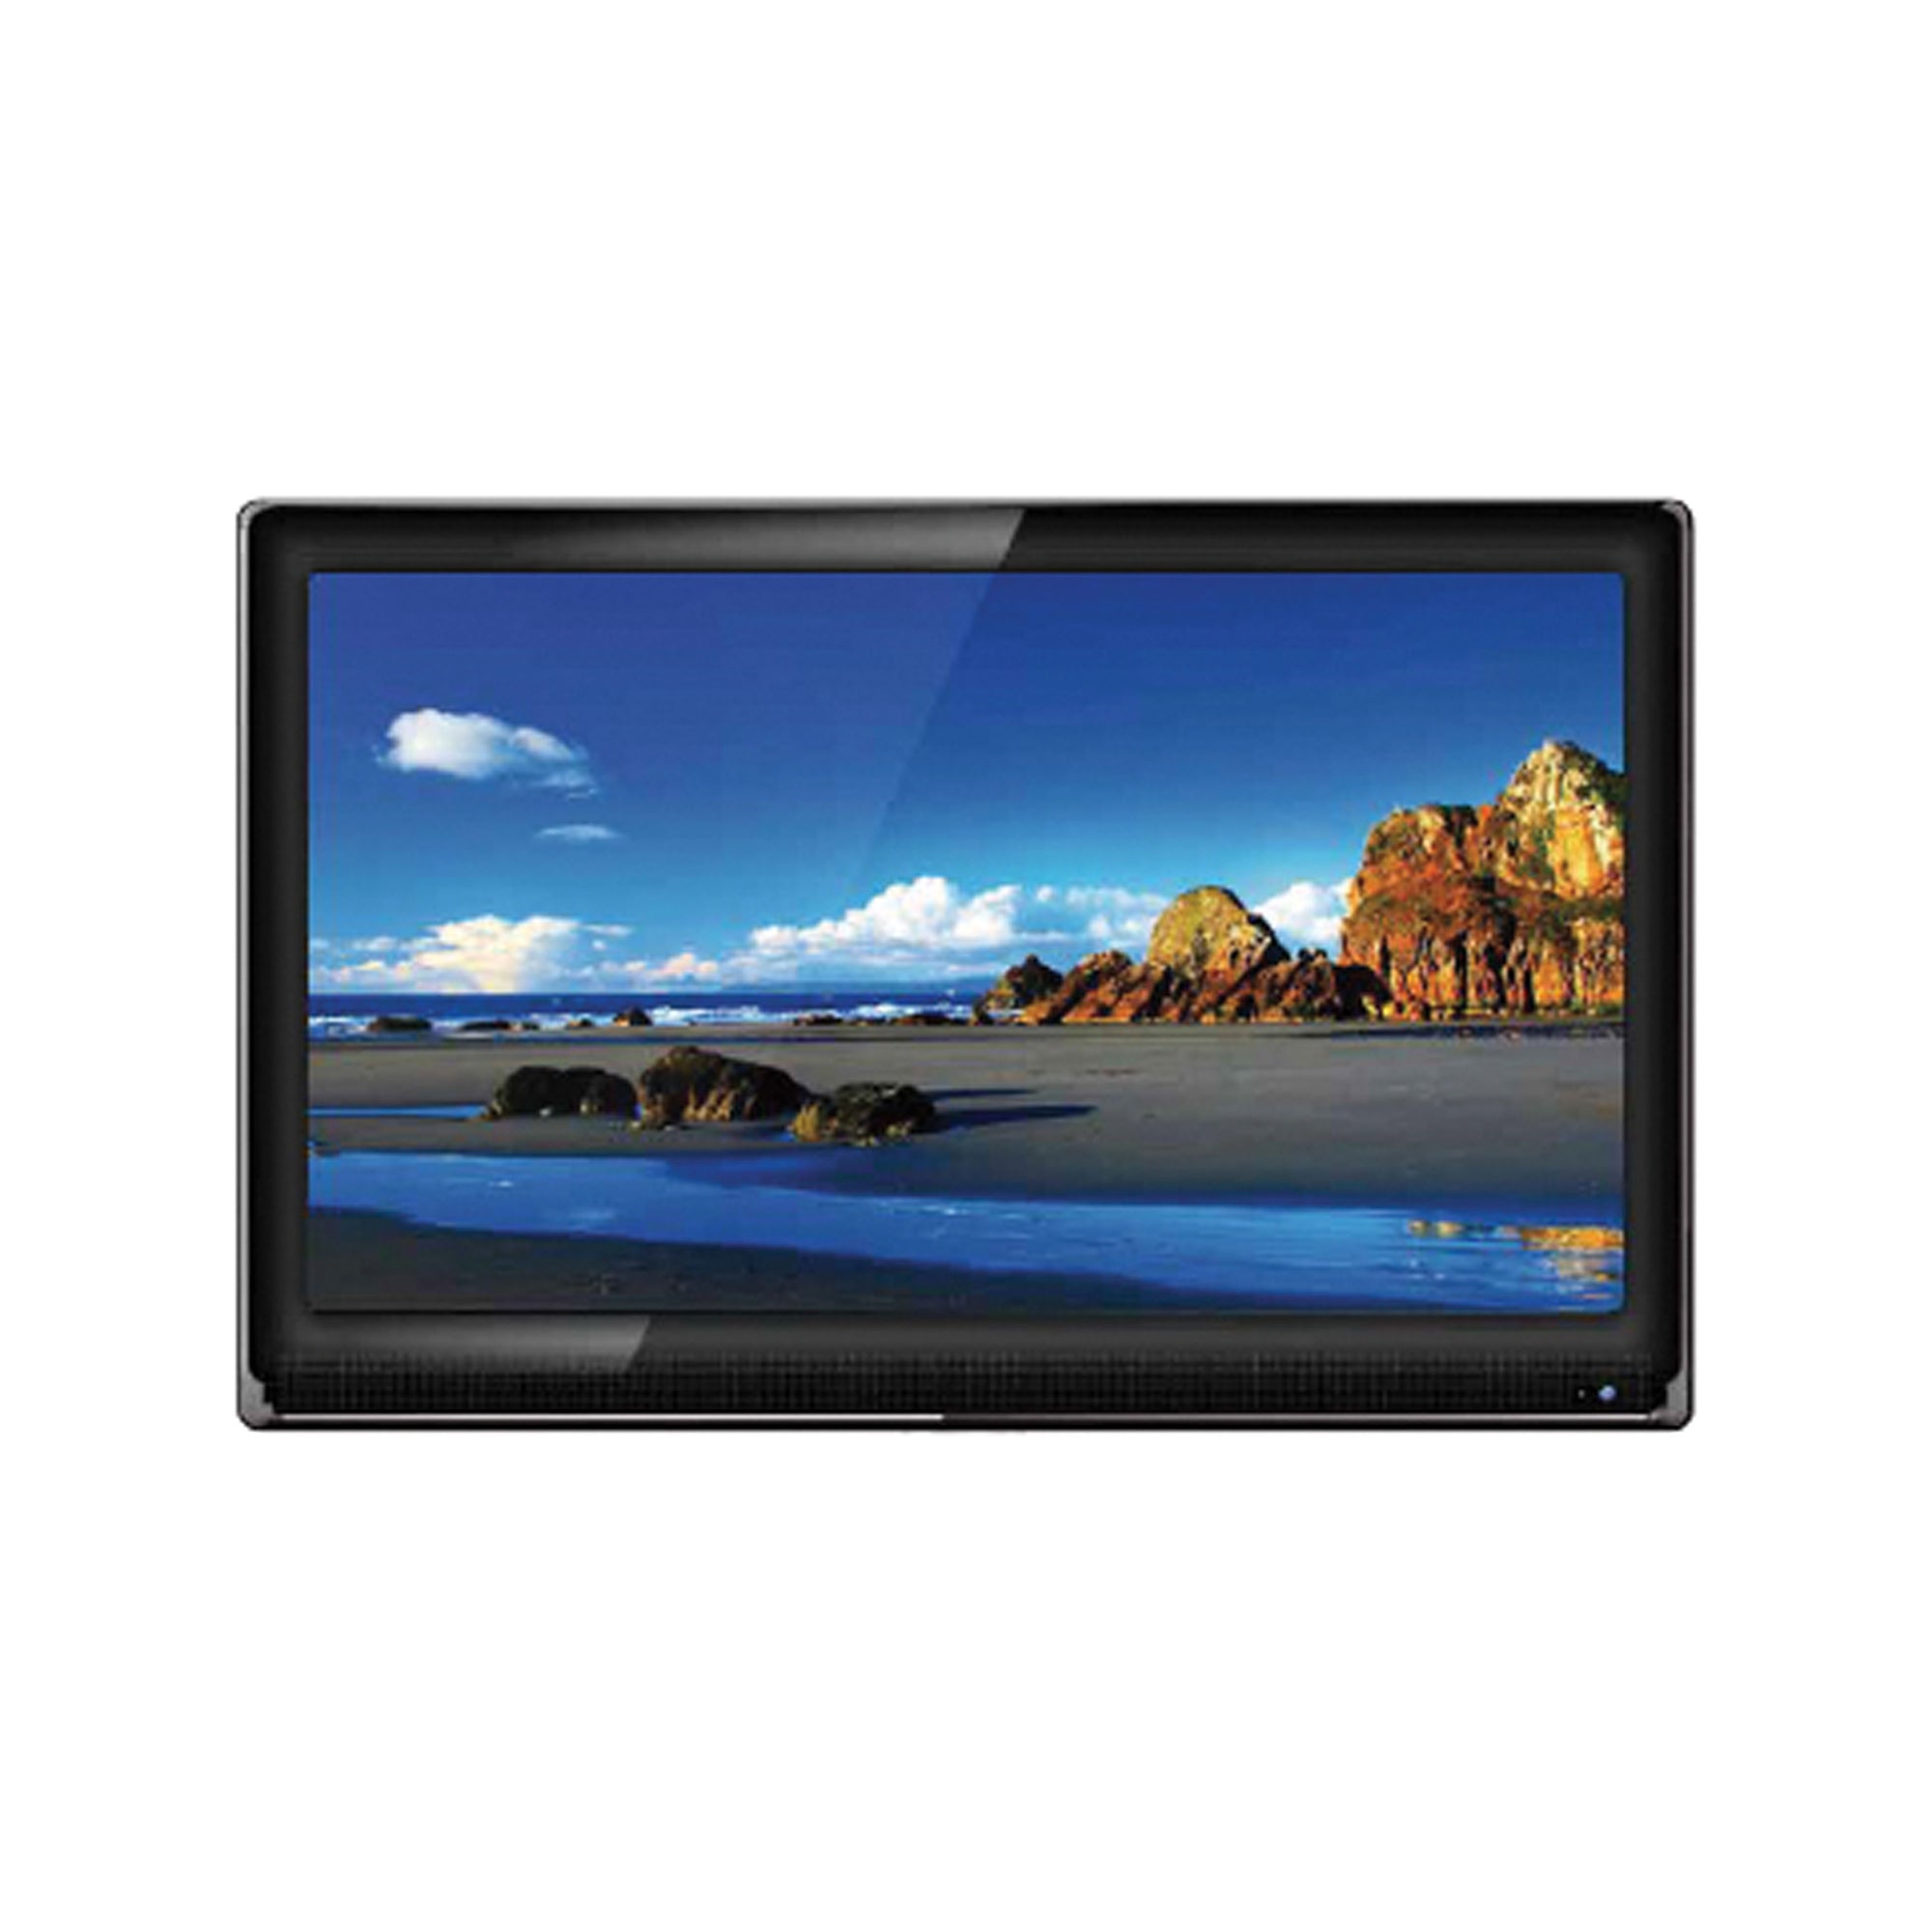 Lippert 422124 Furrion HD LED TV - 29" 110V AC without Stand